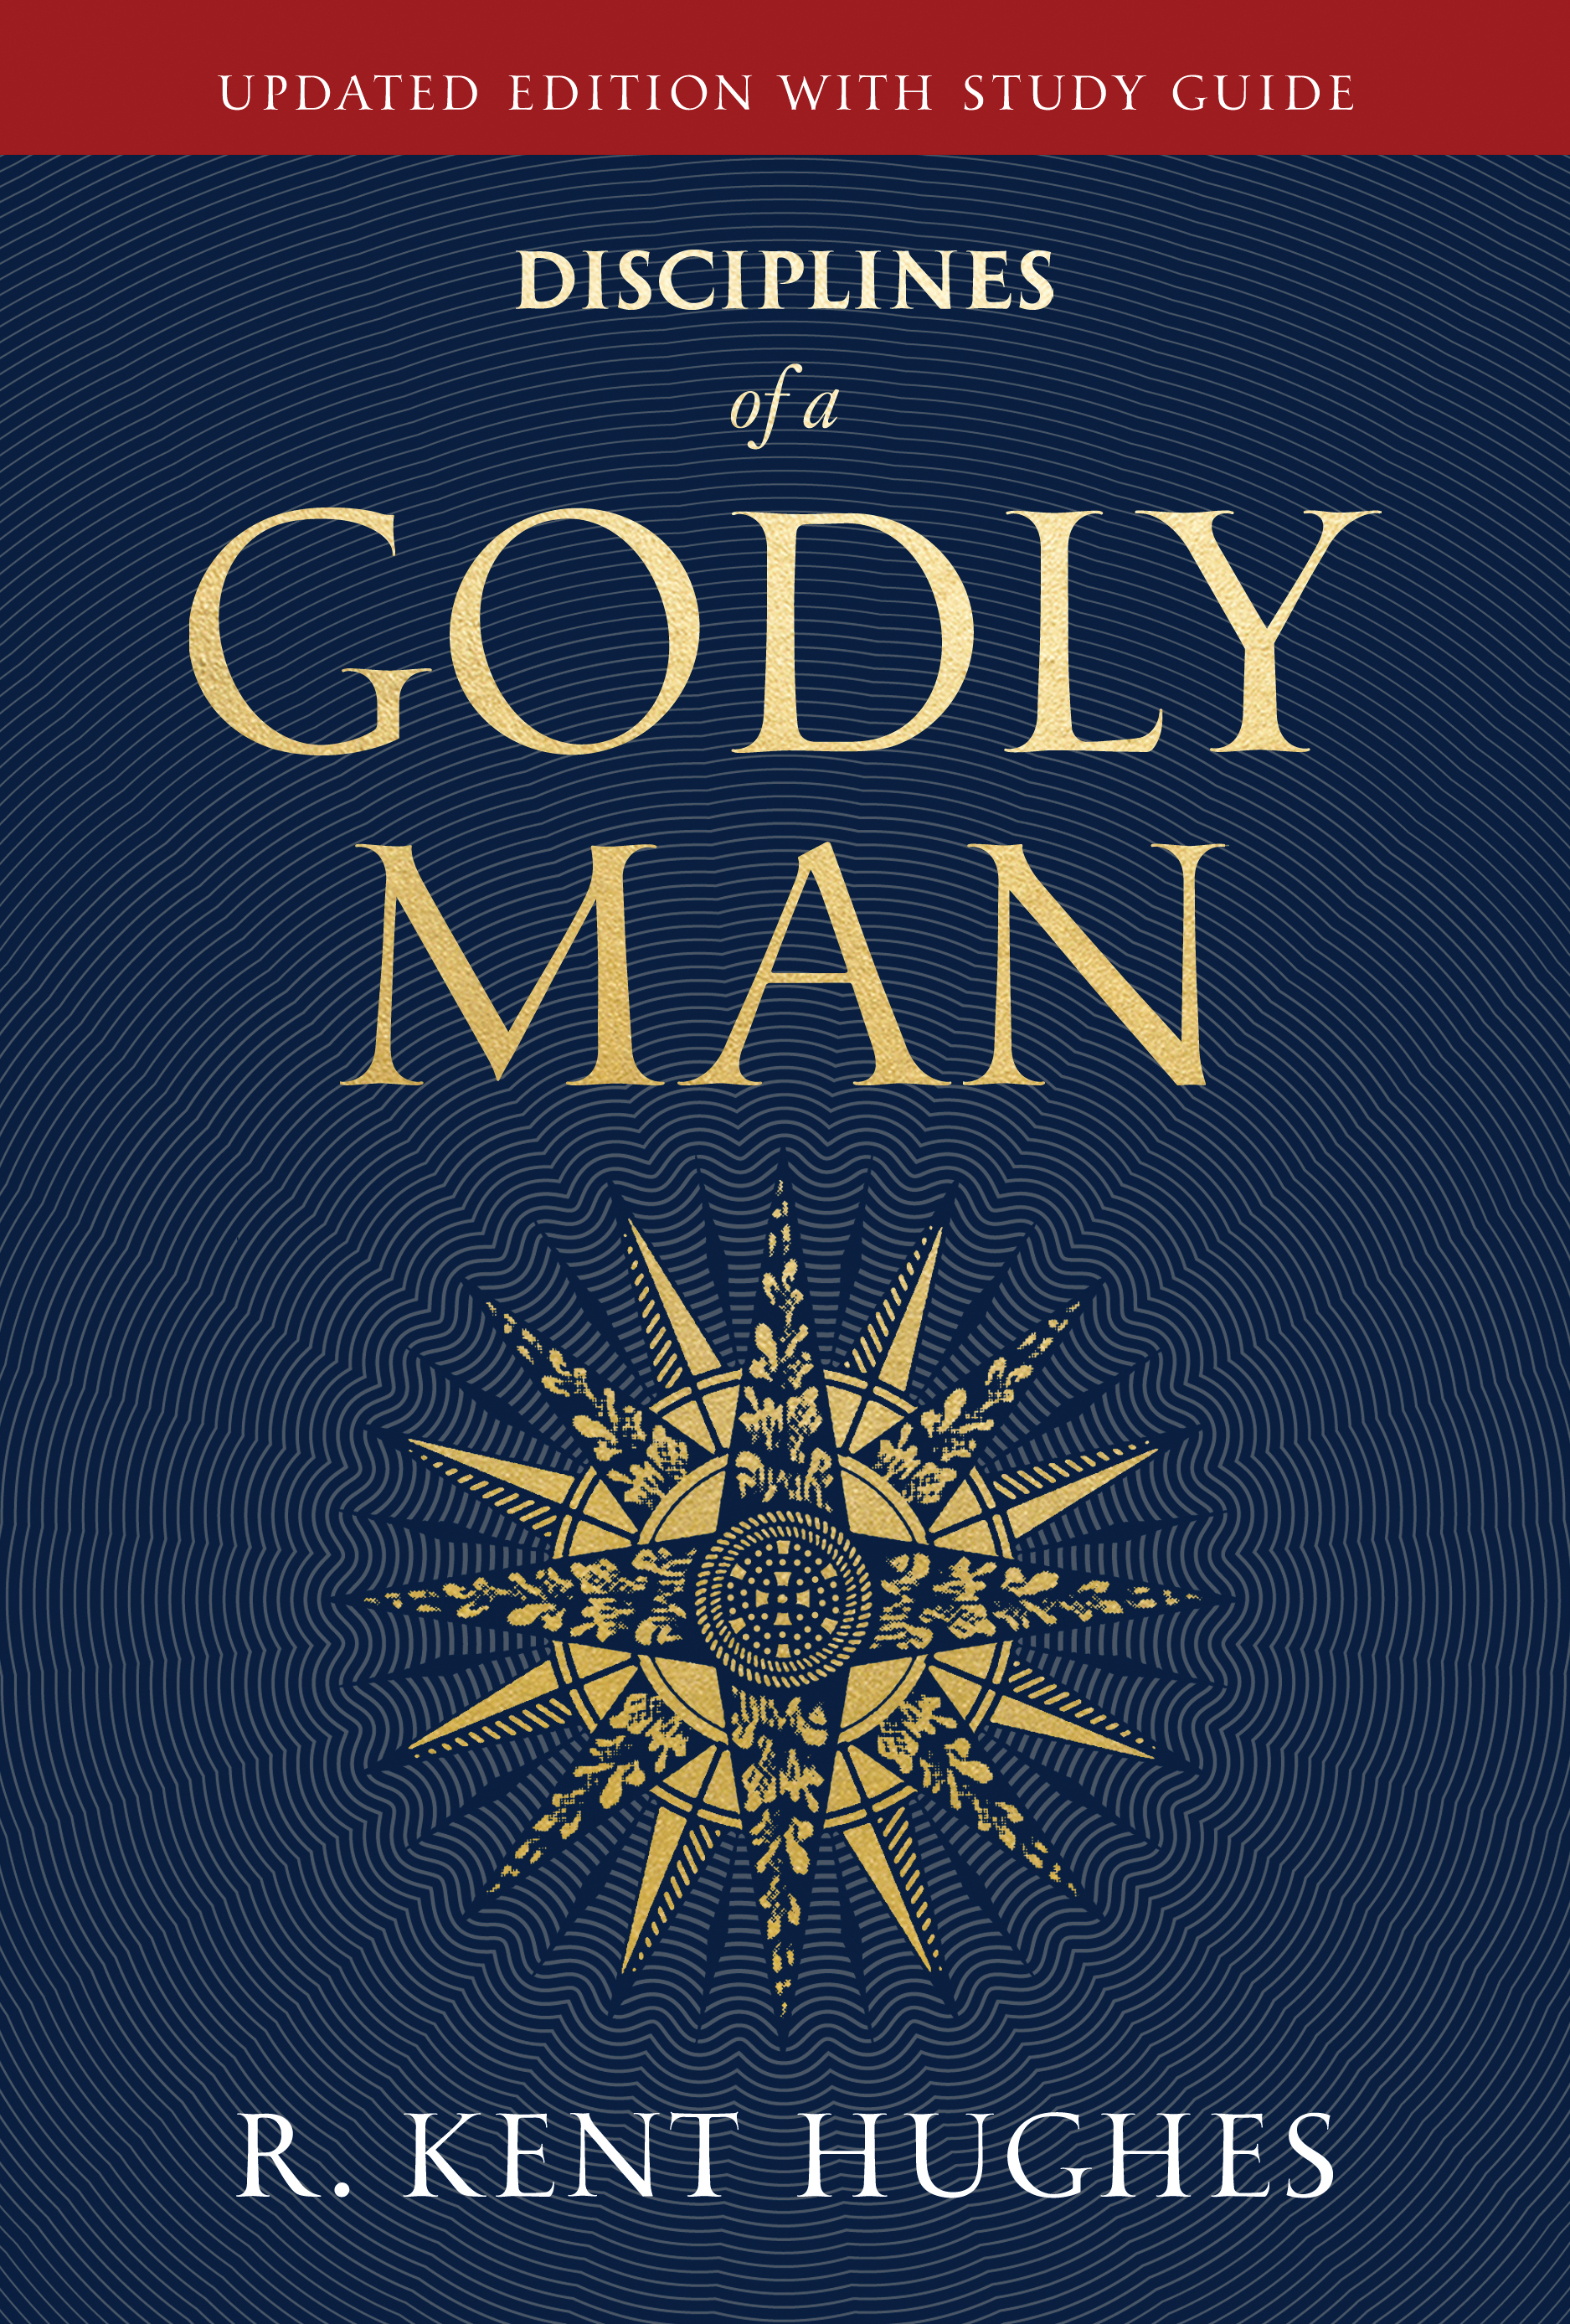 disciplines of a godly man pdf free download